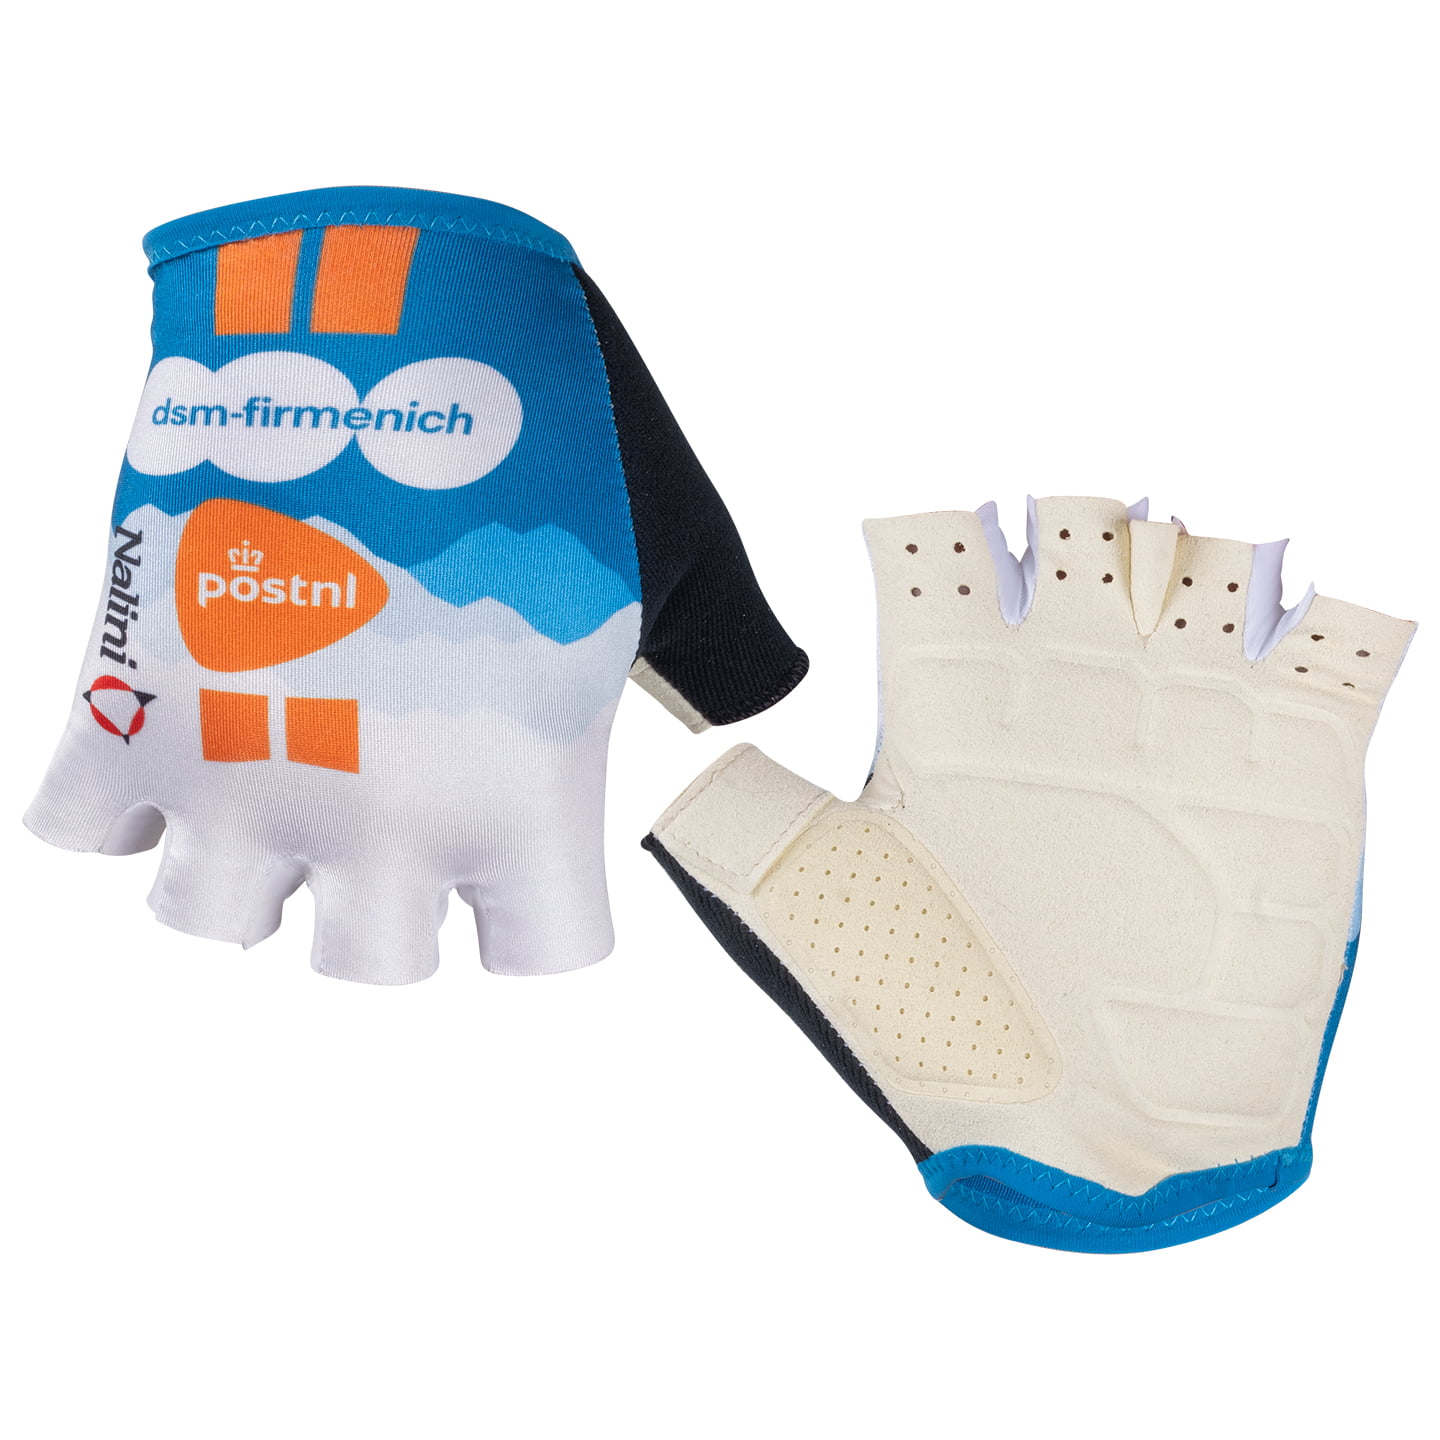 TEAM dsm-firmenich-PostNL 2024 Cycling Gloves, for men, size XL, Cycling gloves, Cycle gear